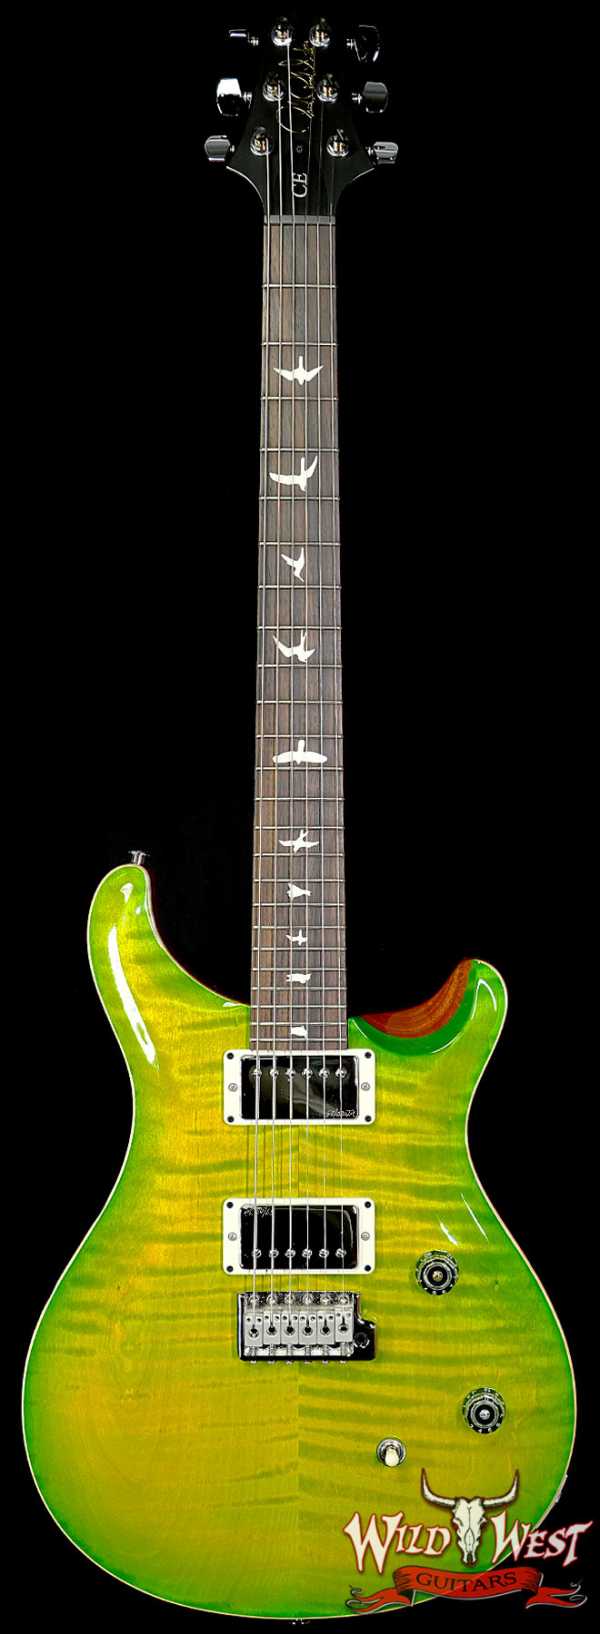 Paul Reed Smith PRS Wild West Guitars Special Run CE 24 Painted Black Neck 57/08 Covered Pickups Eriza Verde 7.95 LBS